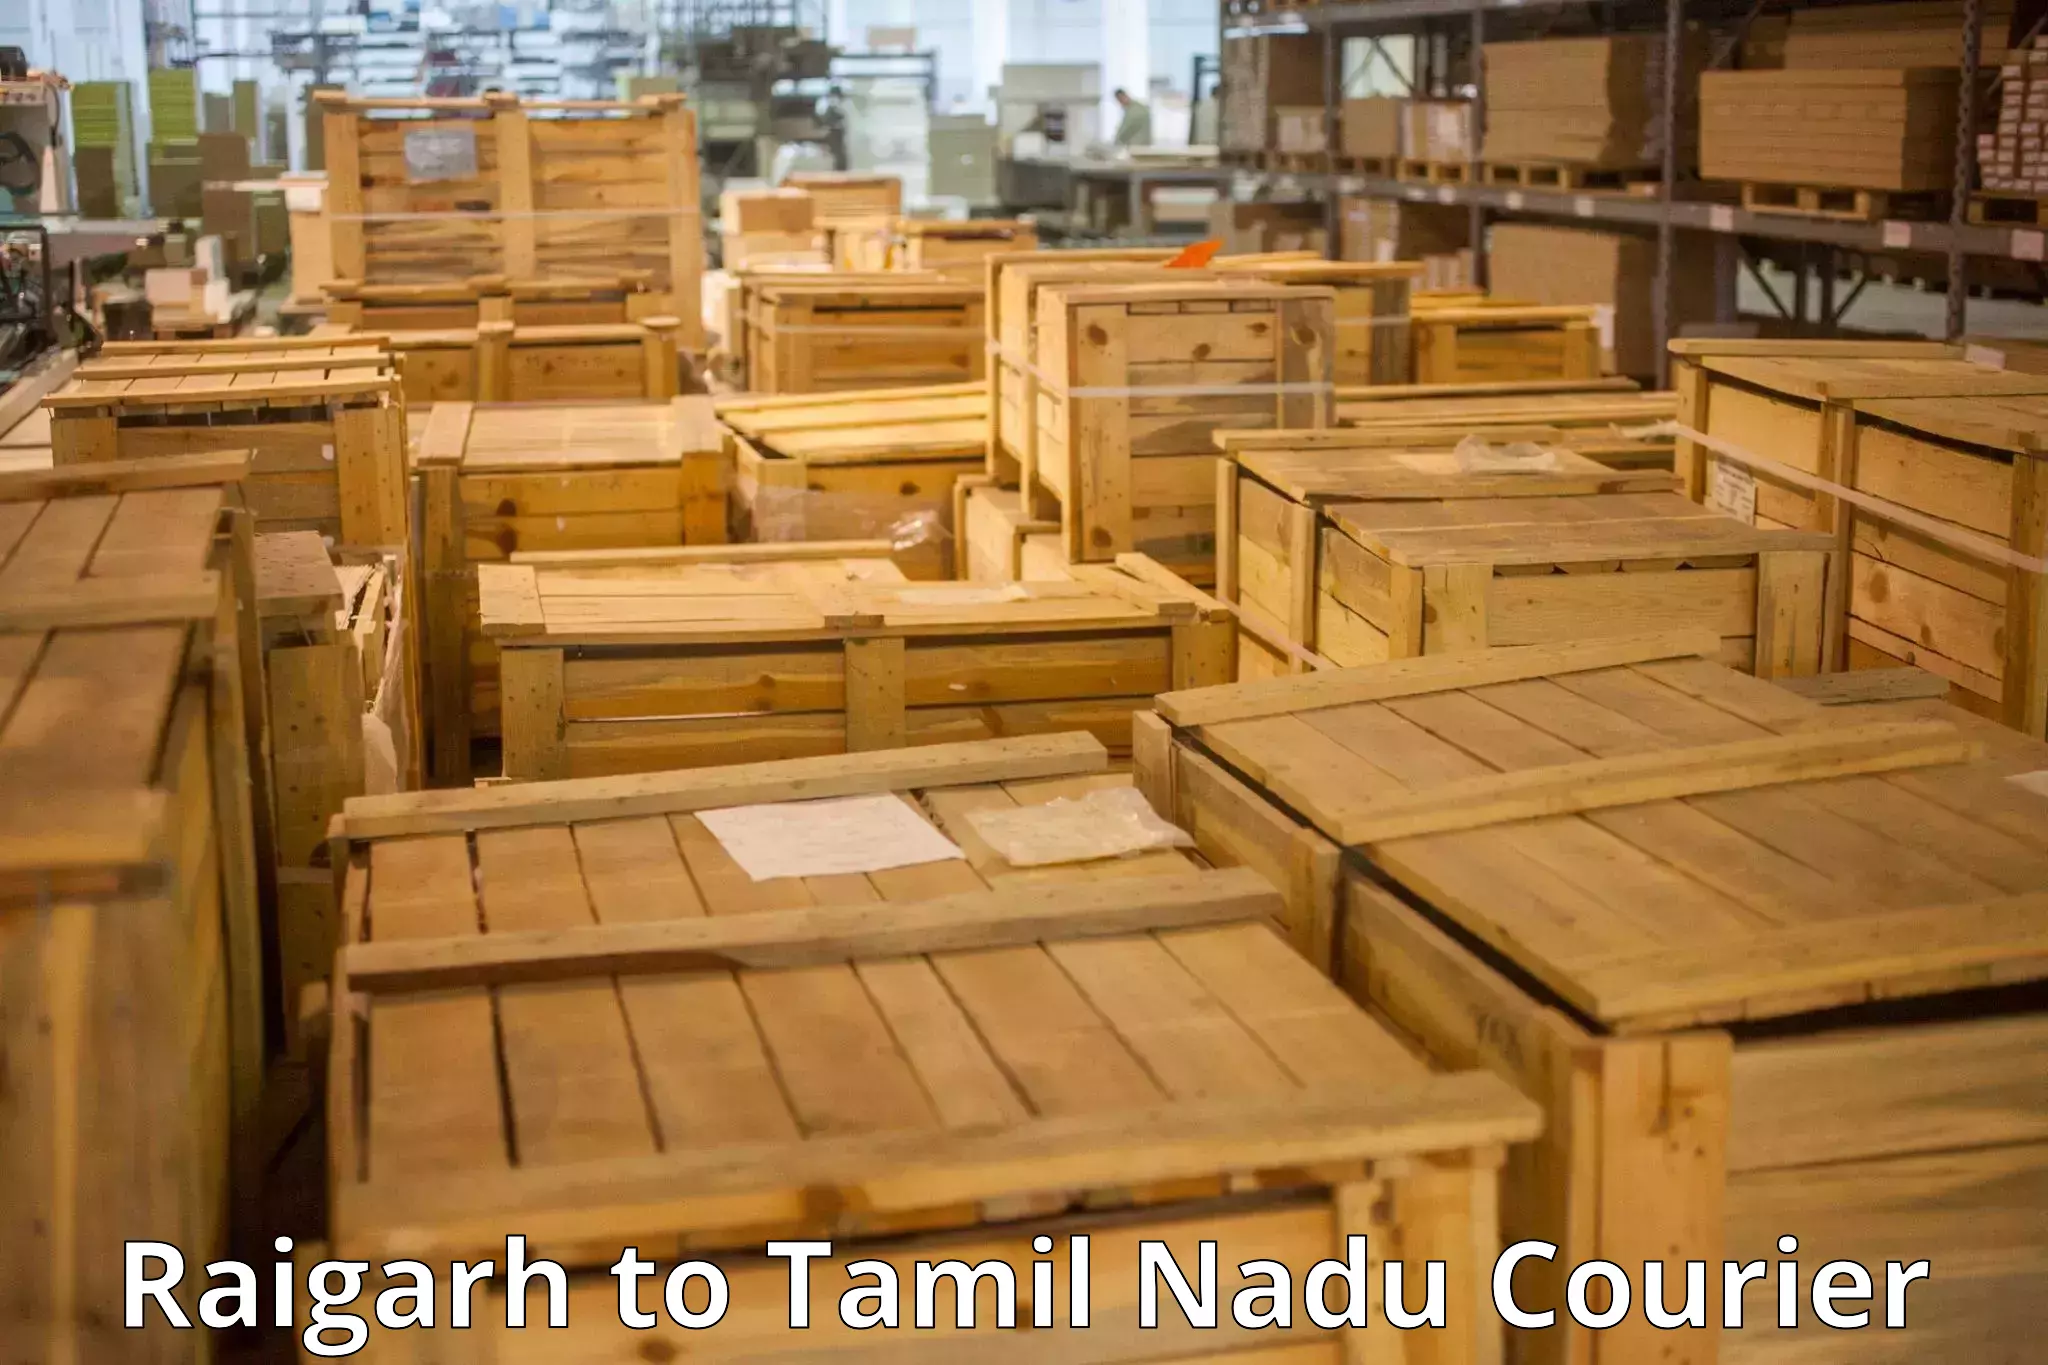 Luggage delivery providers Raigarh to Tamil Nadu